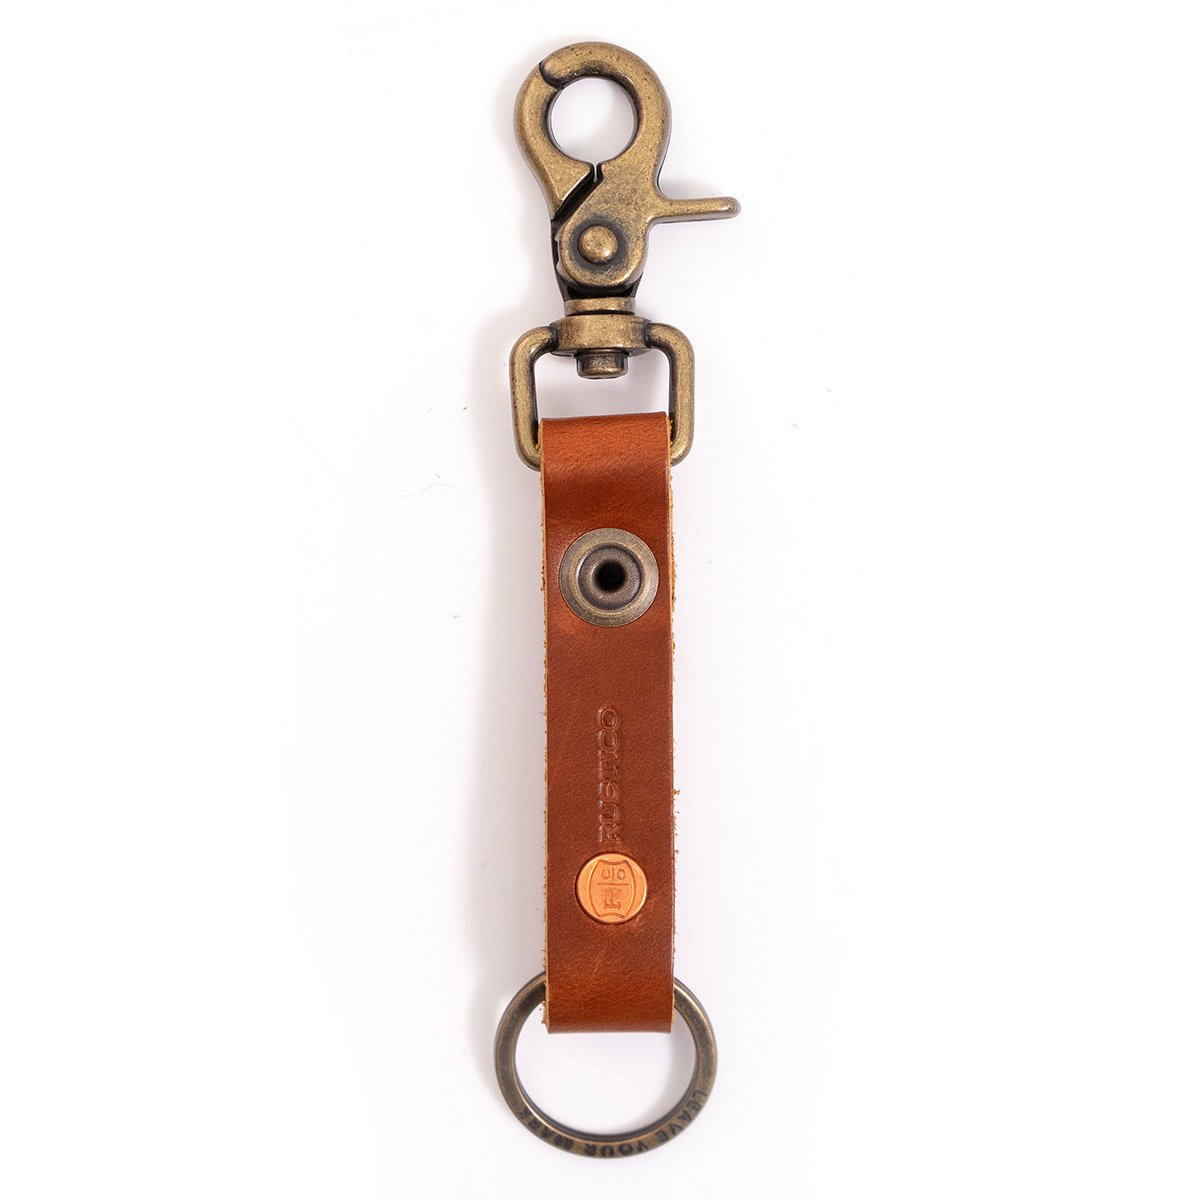 Love The Hardware On This Keychain Leather Keychain, Leather Items,  Keychain